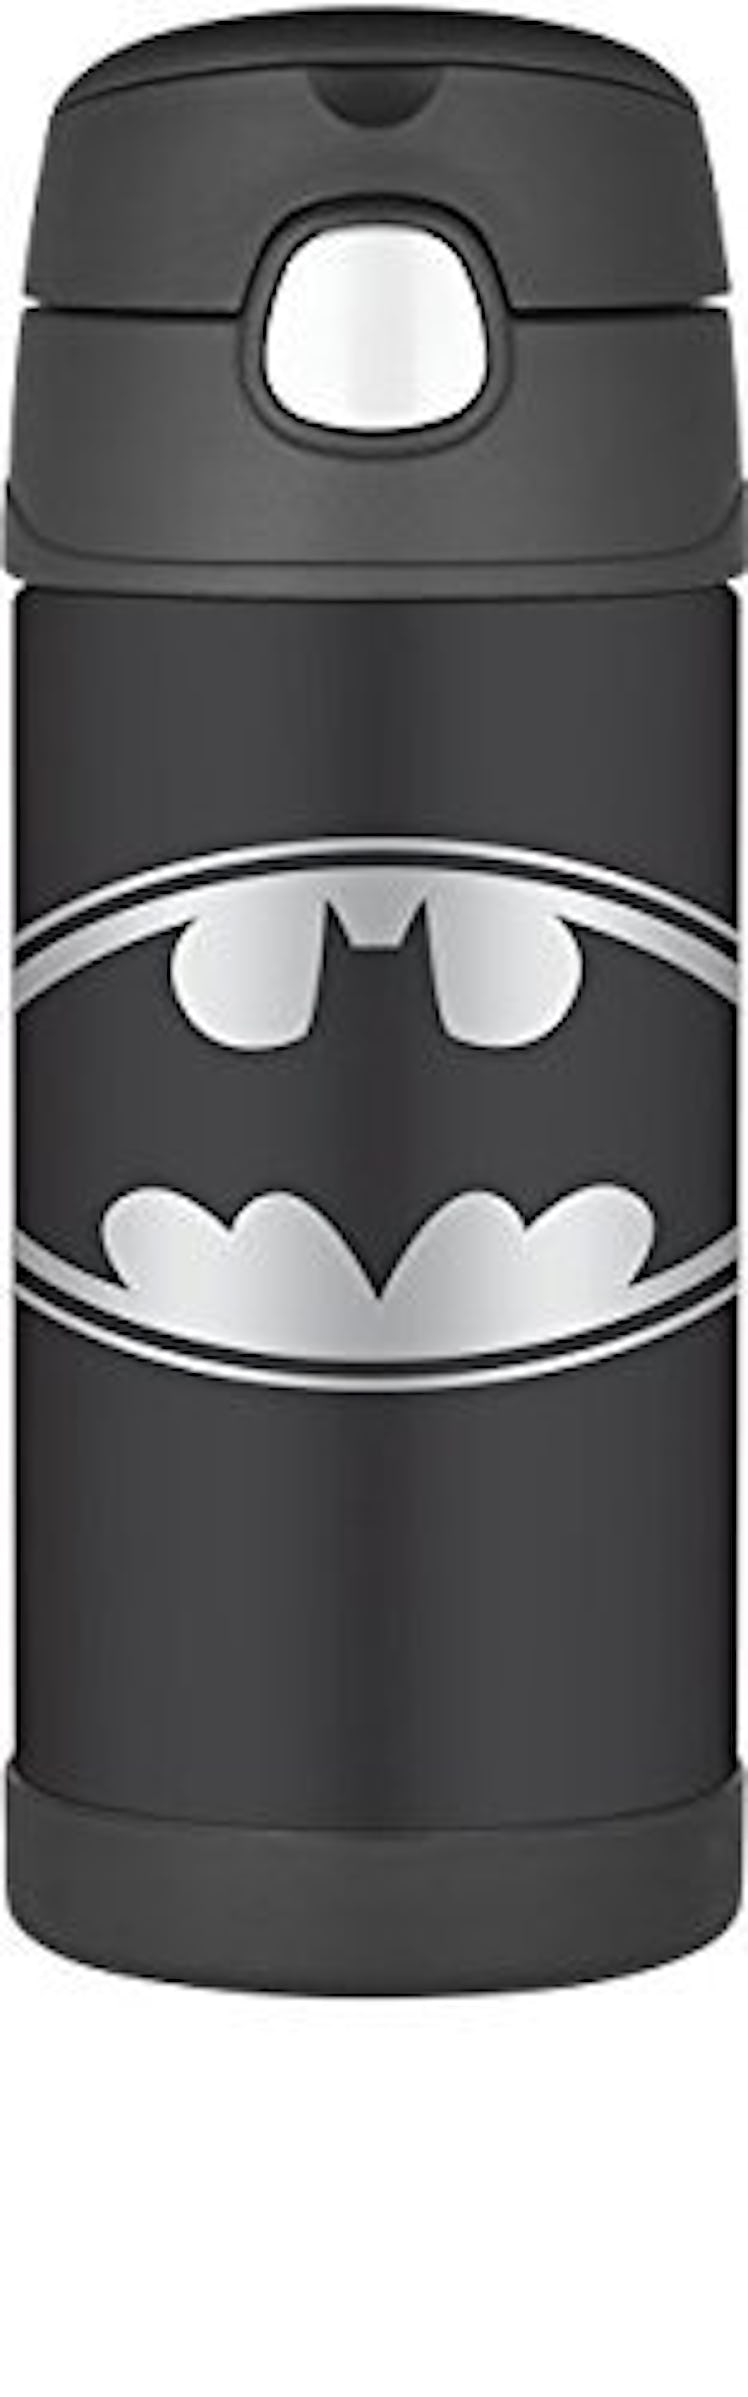 Batman 12 Ounce Bottle by Thermos